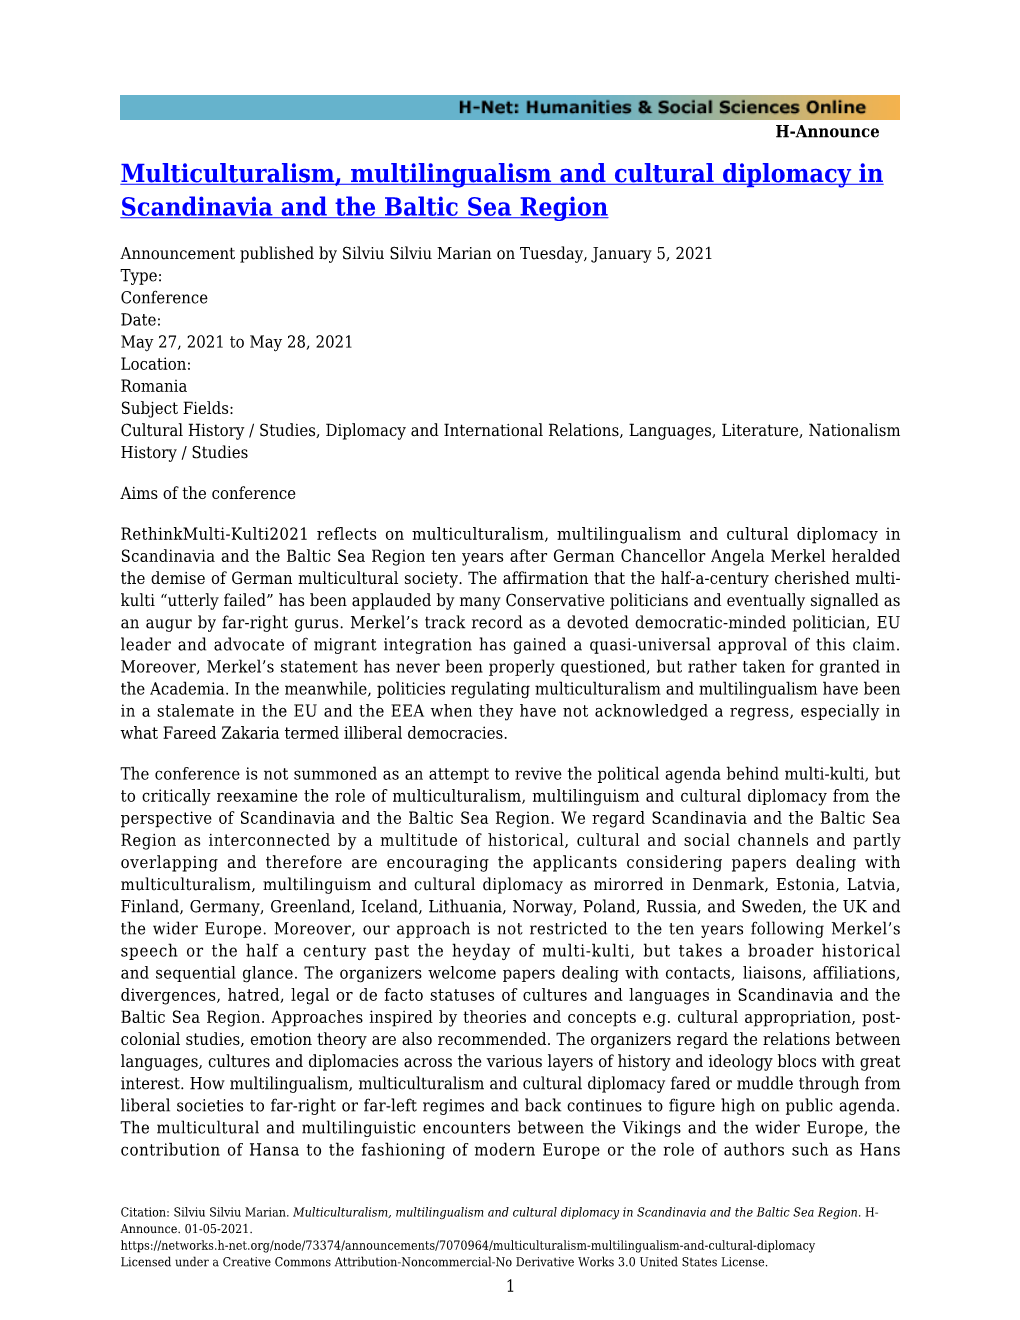 Multiculturalism, Multilingualism and Cultural Diplomacy in Scandinavia and the Baltic Sea Region